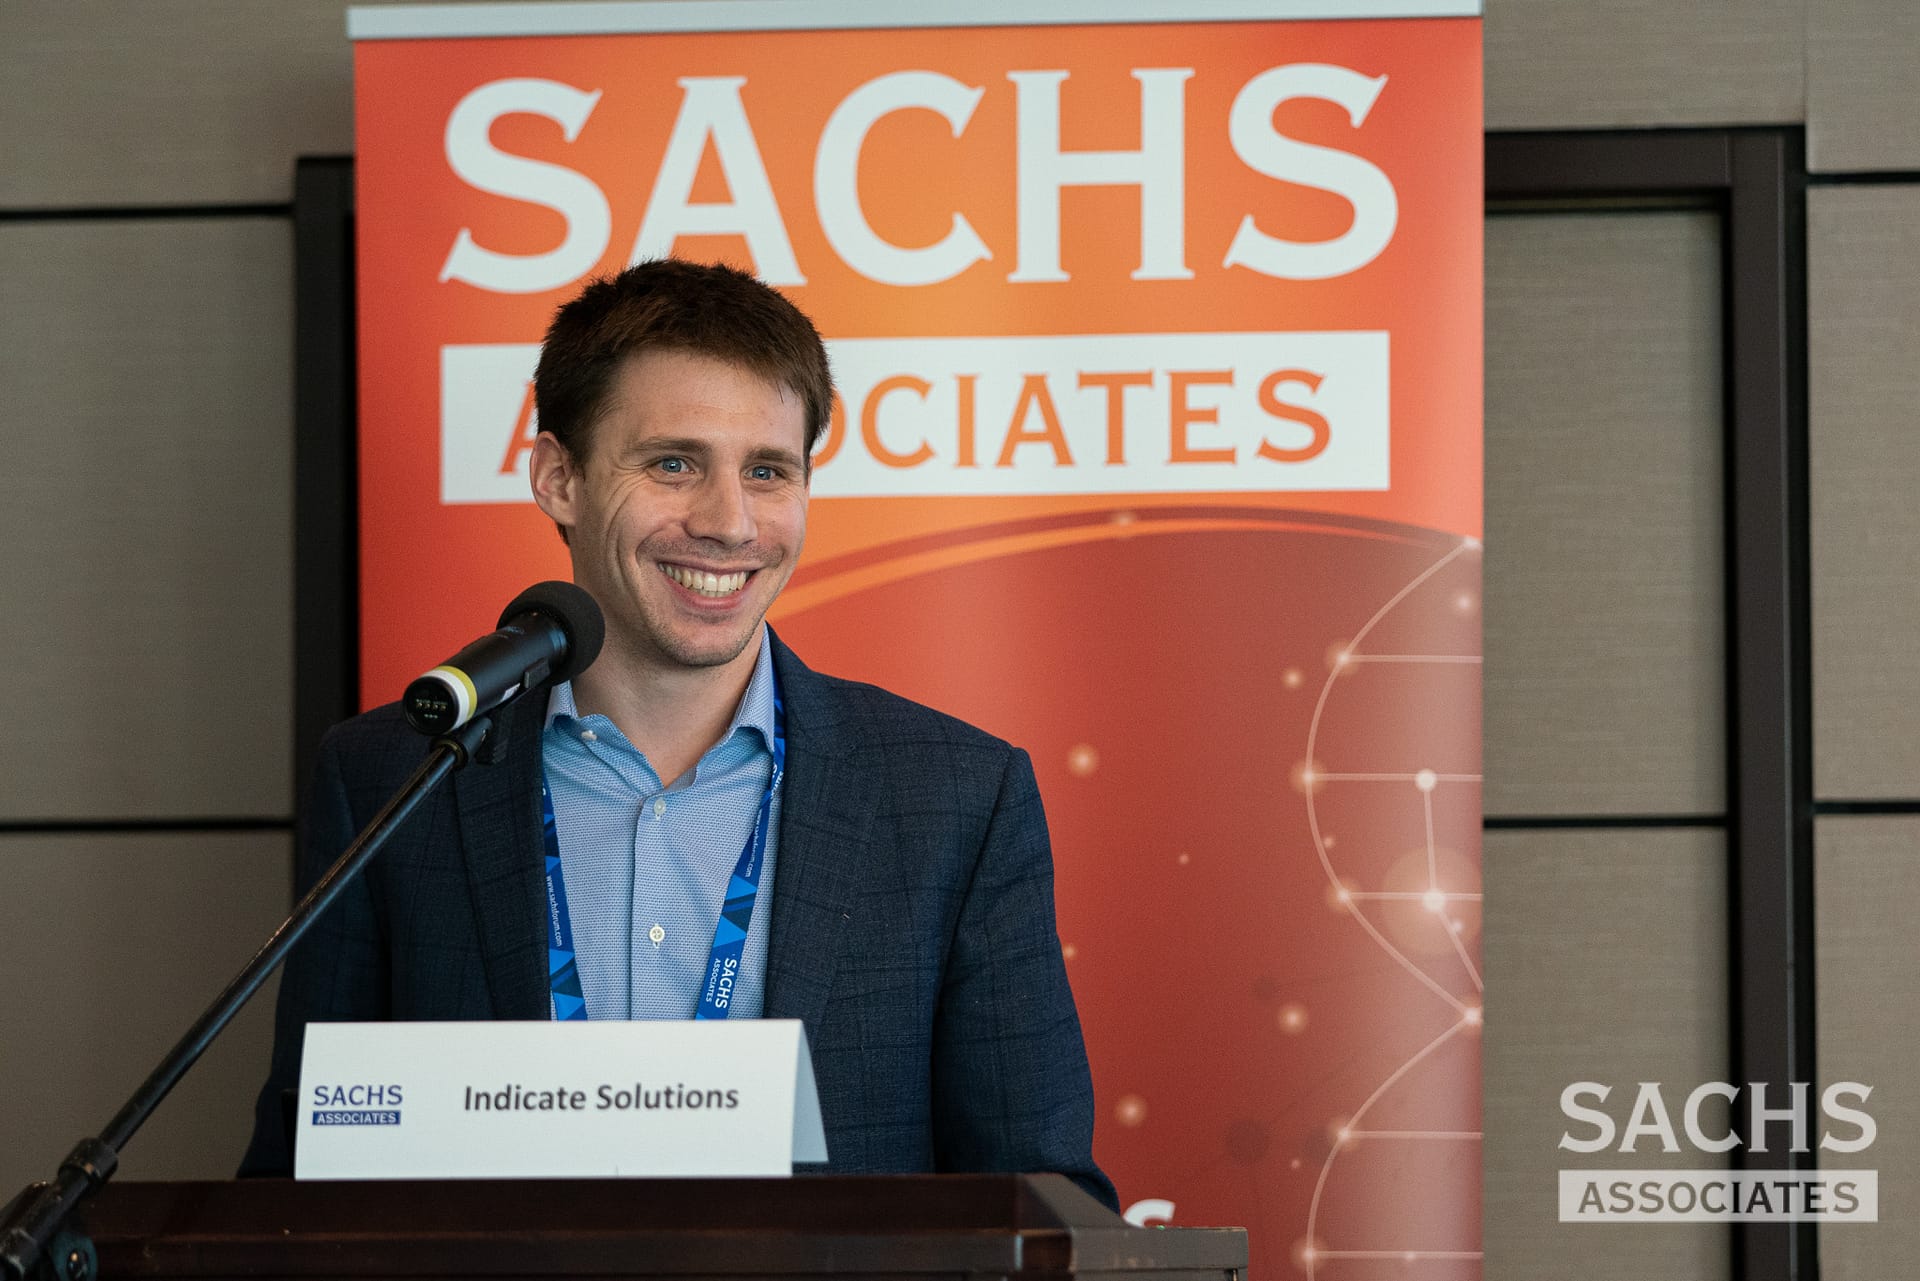 Sachs Associates & Indicate Solutions together at Zurich